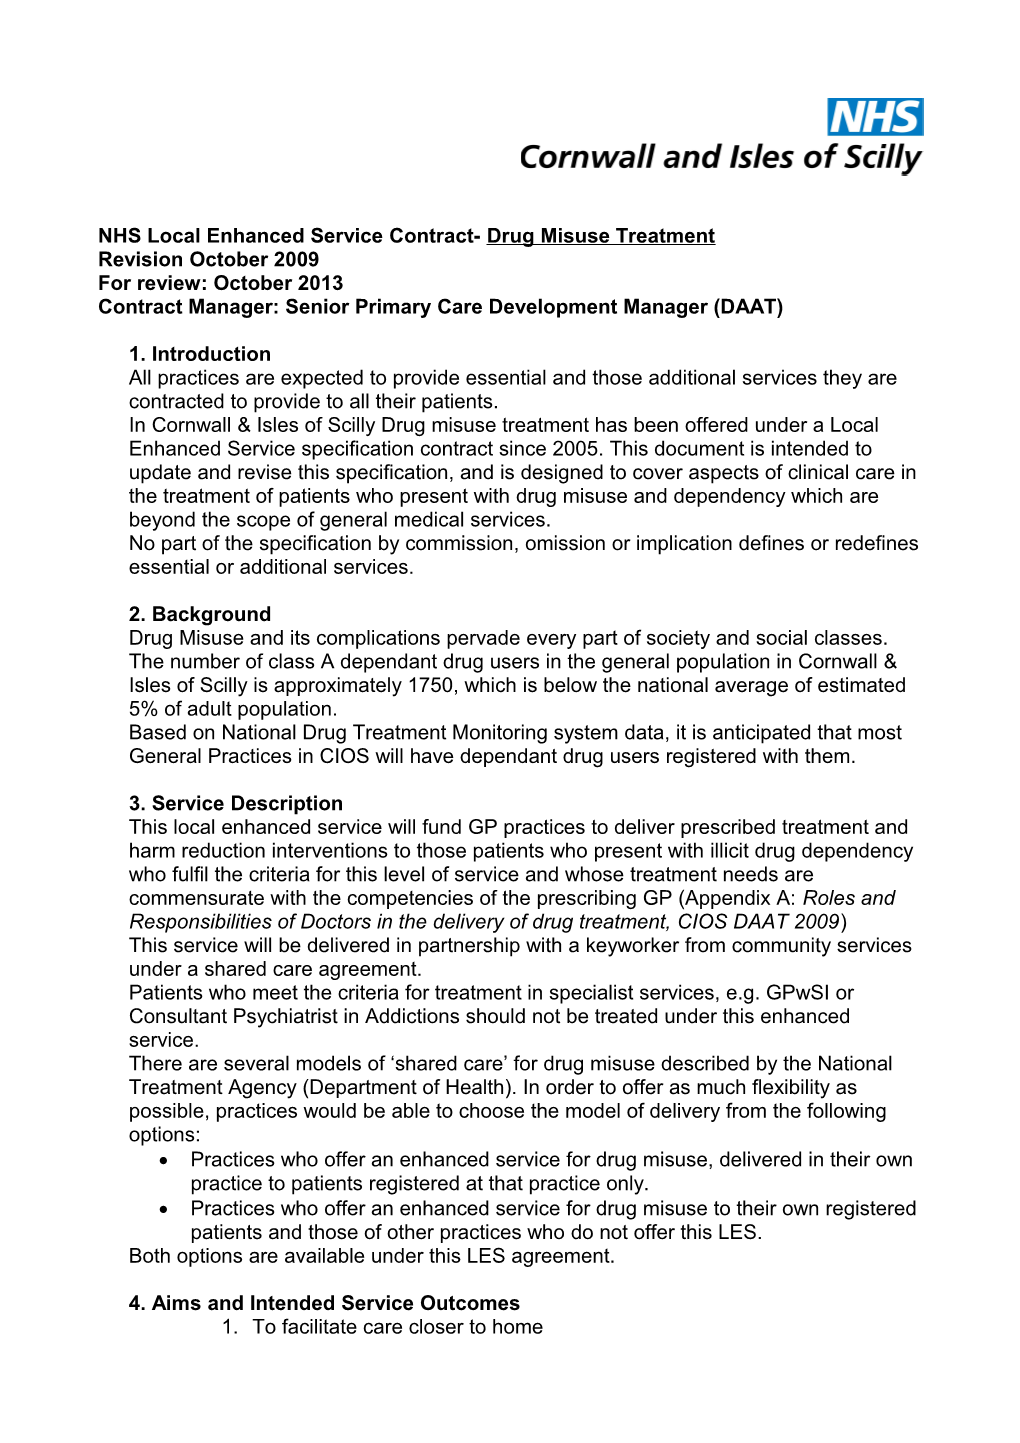 NHS Local Enhanced Service Contract- Drug Misuse Treatment